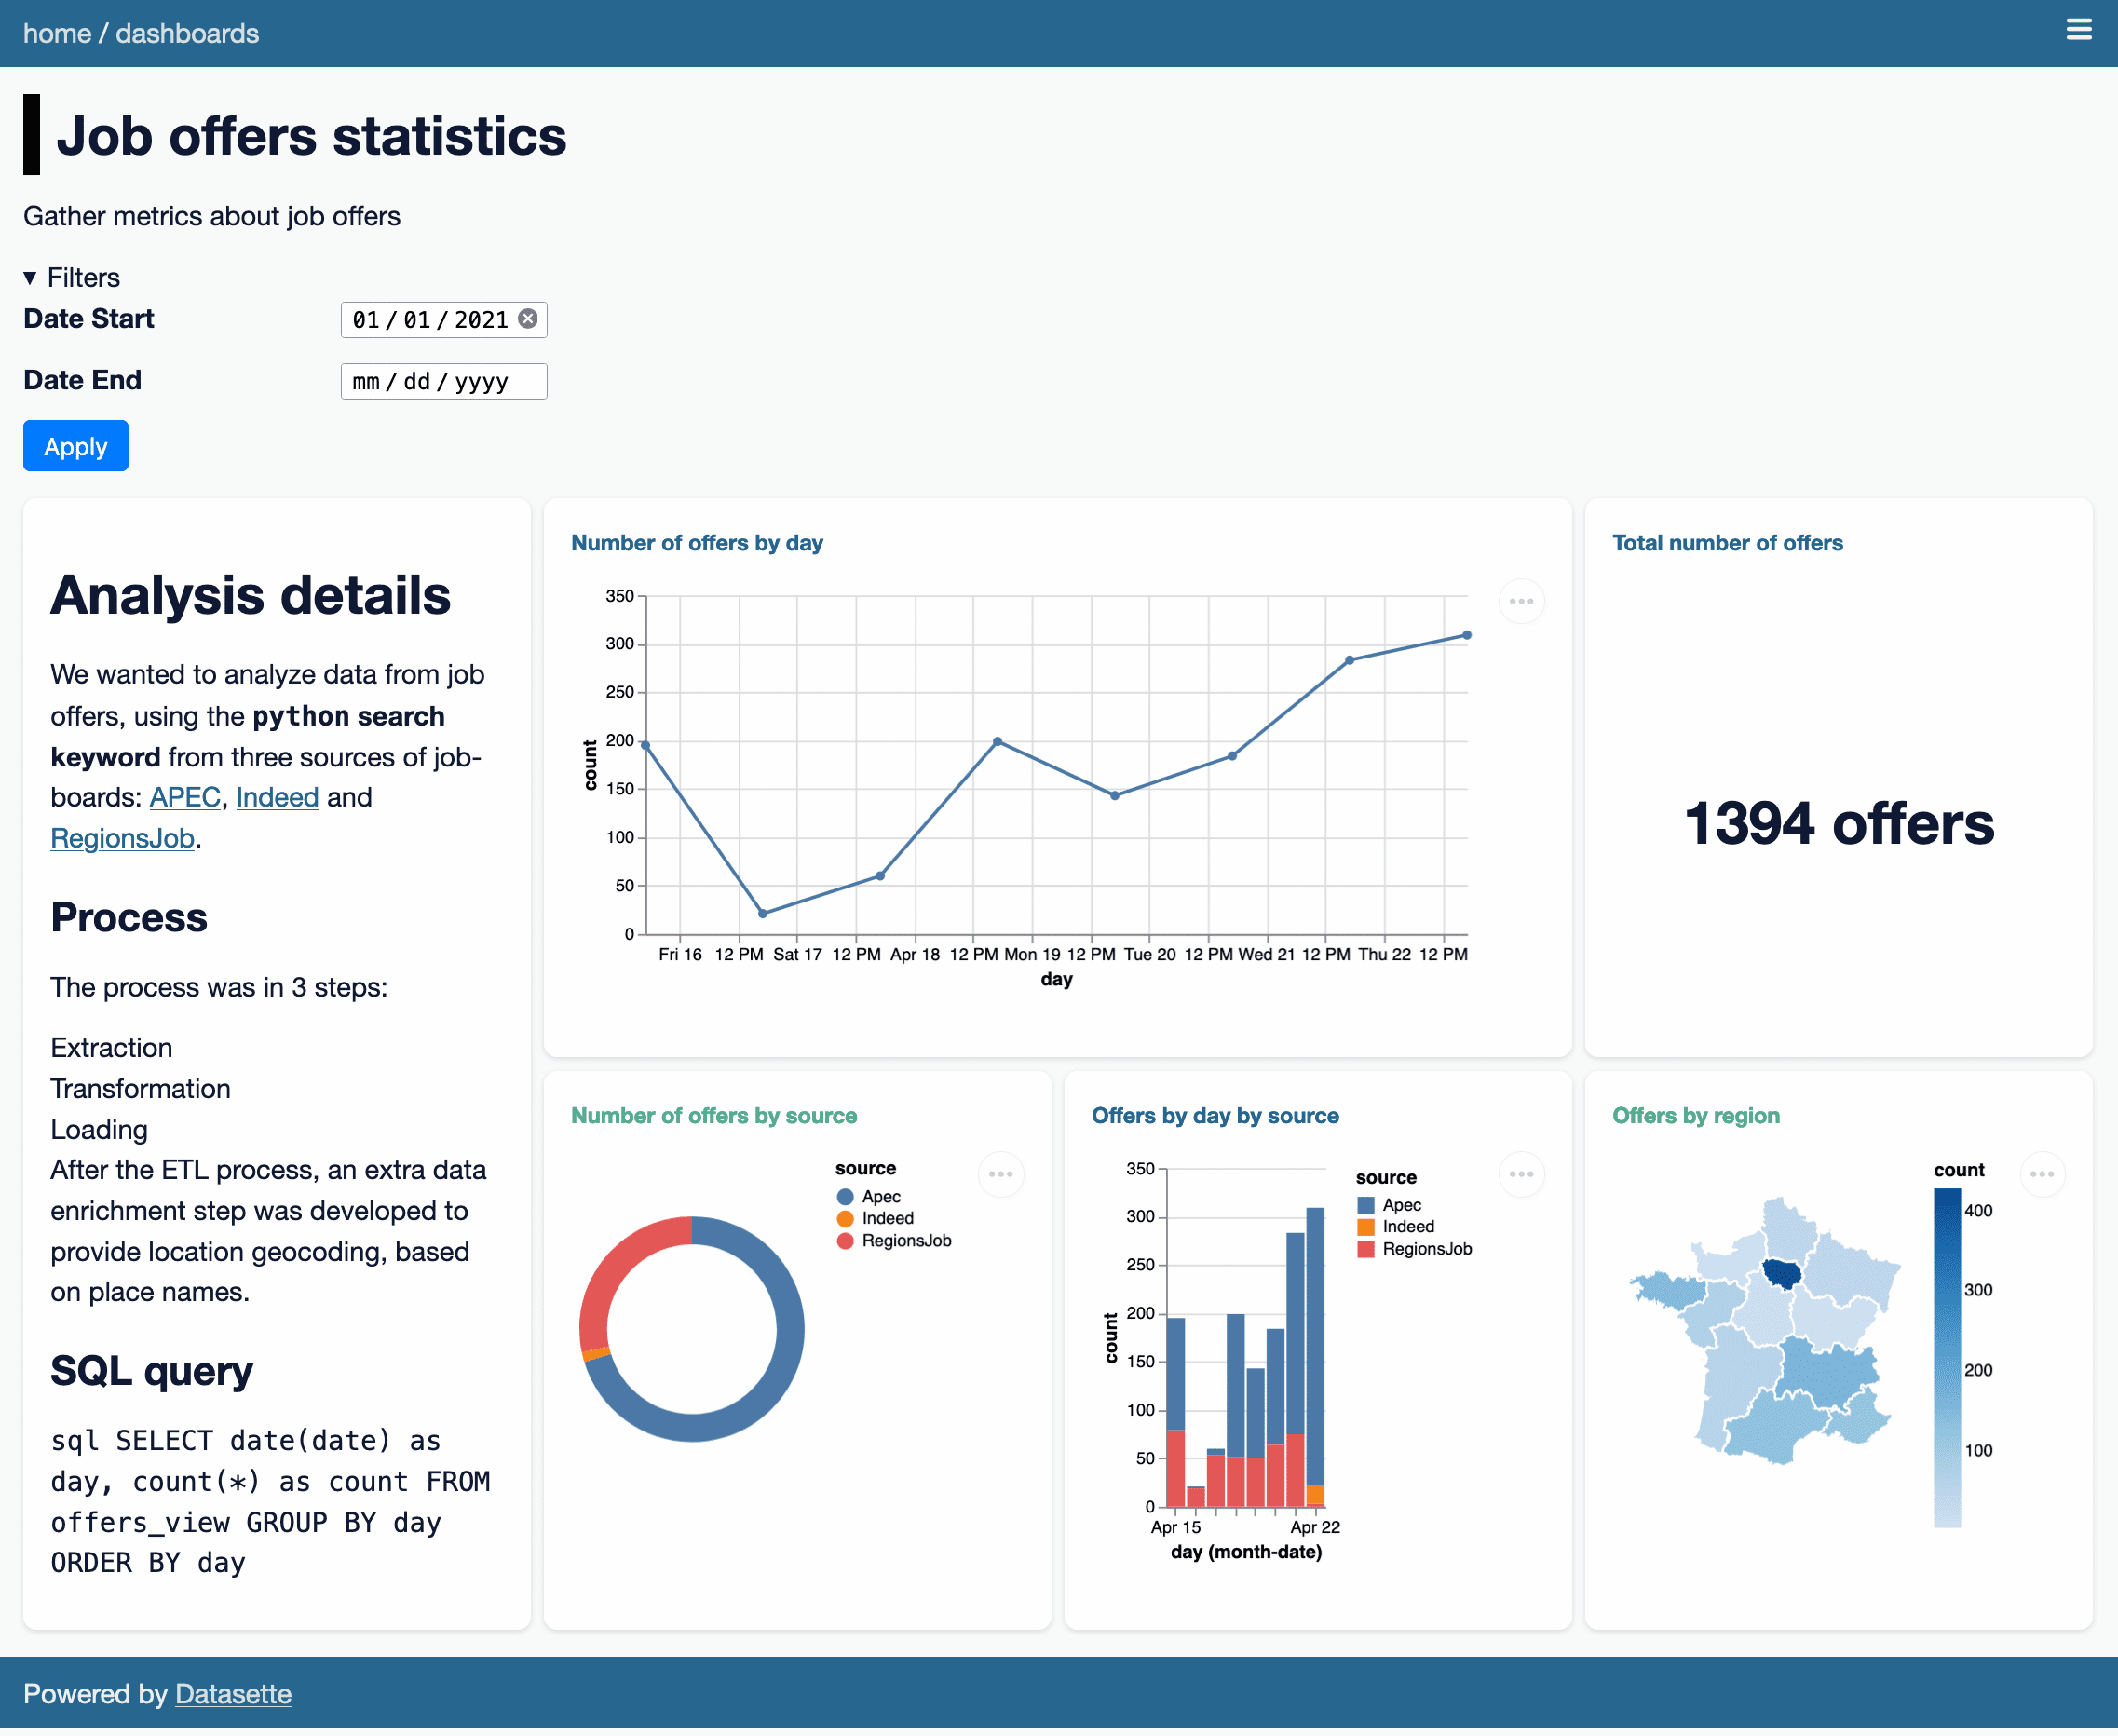 A dashboard, showing Job offers statistics - with a line chart, a big number, a donut chart, a nested bar chart and a choropleth map. The elements are arranged in a visually pleasing grid, with the line chart taking up two columns while everything else takes up one.